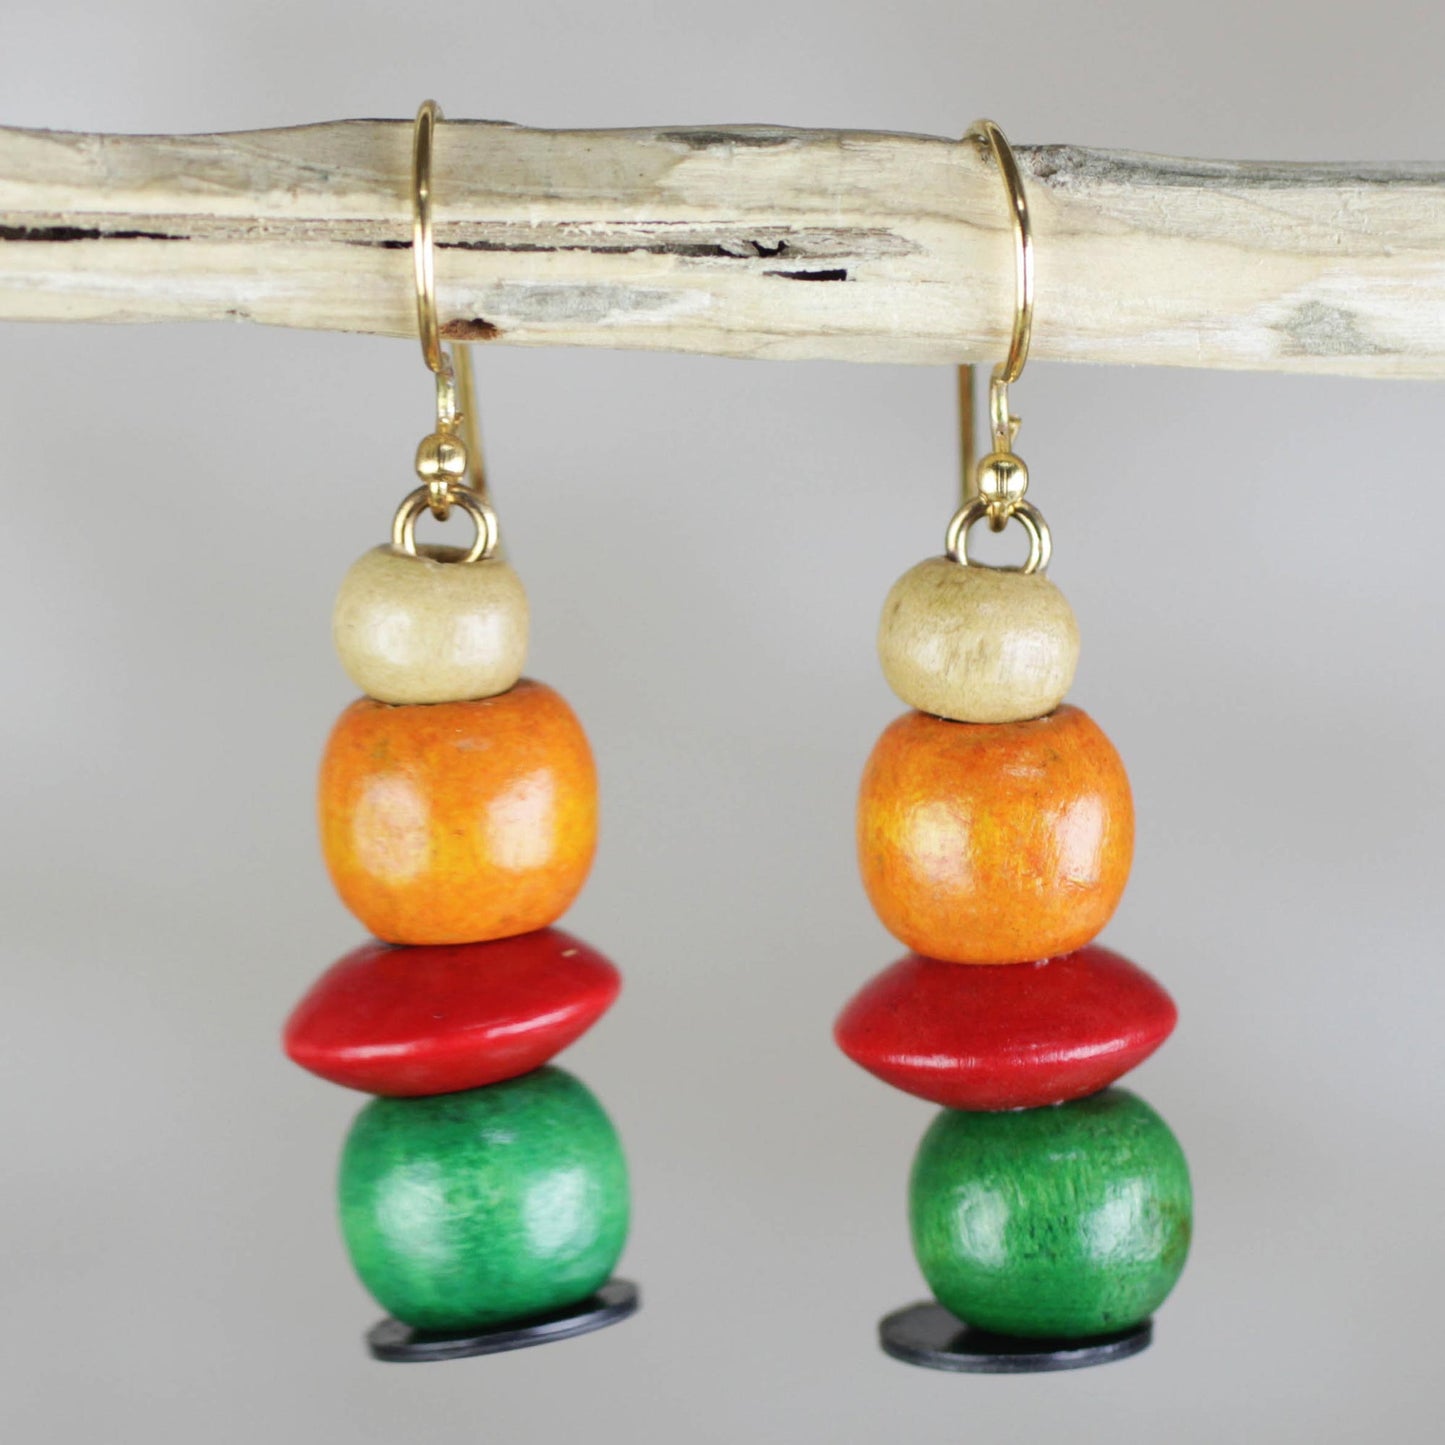 Candy Columns Orange Red and Green Sese Wood Candy Columns Dangle Earrings